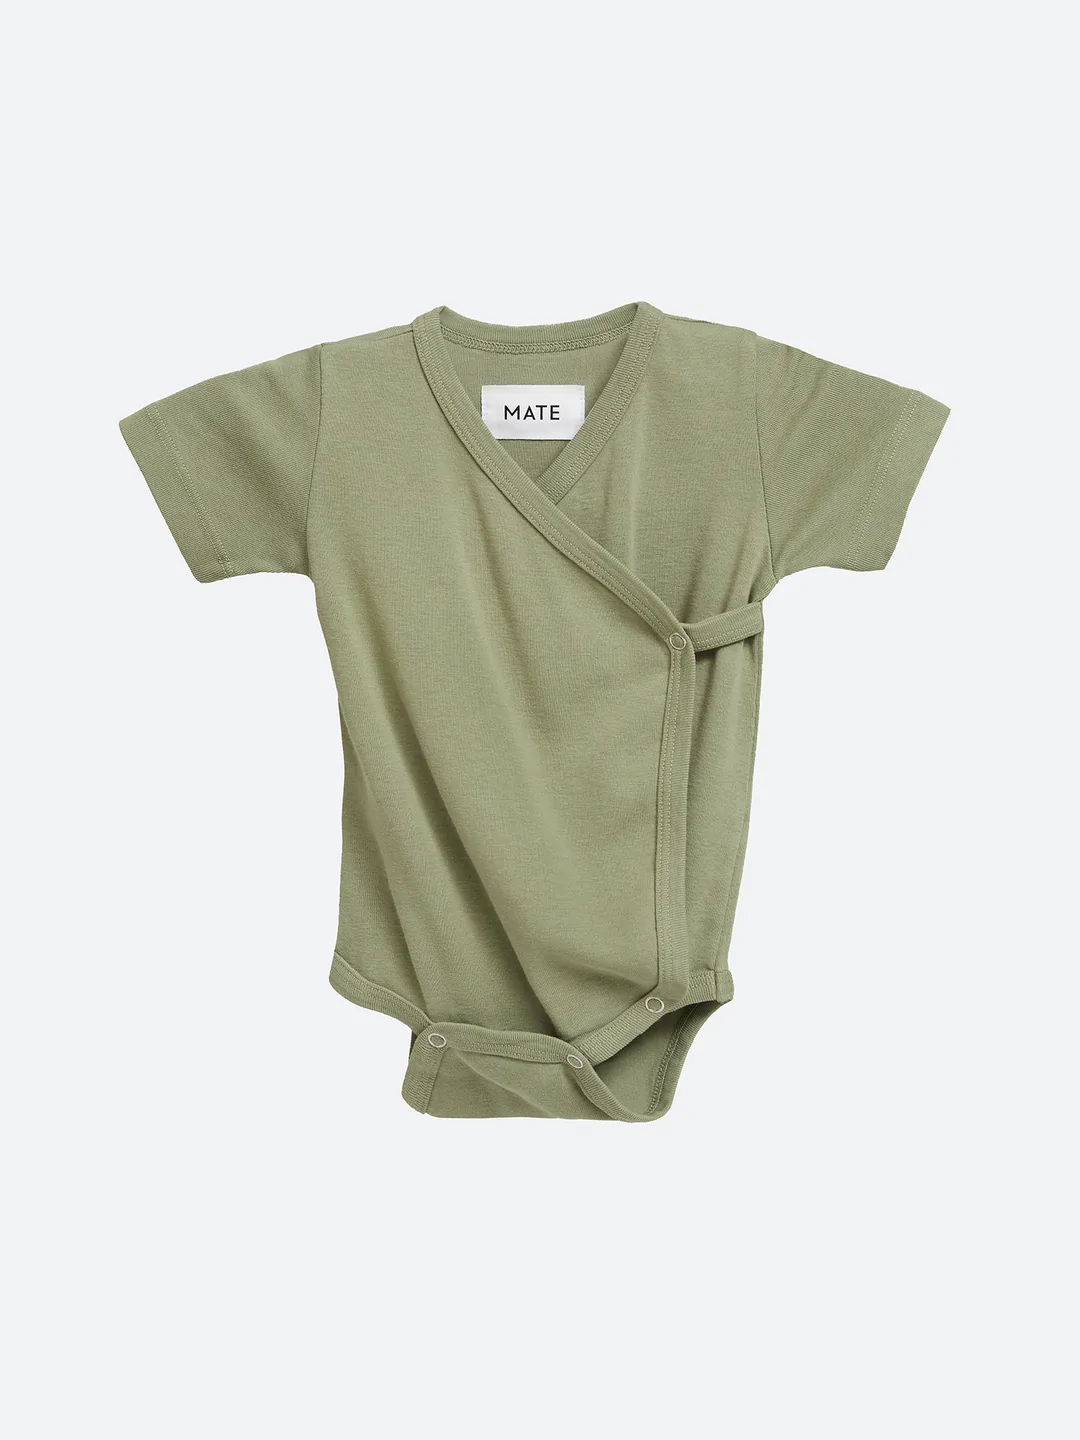 organic non toxic clothes for babies from mate